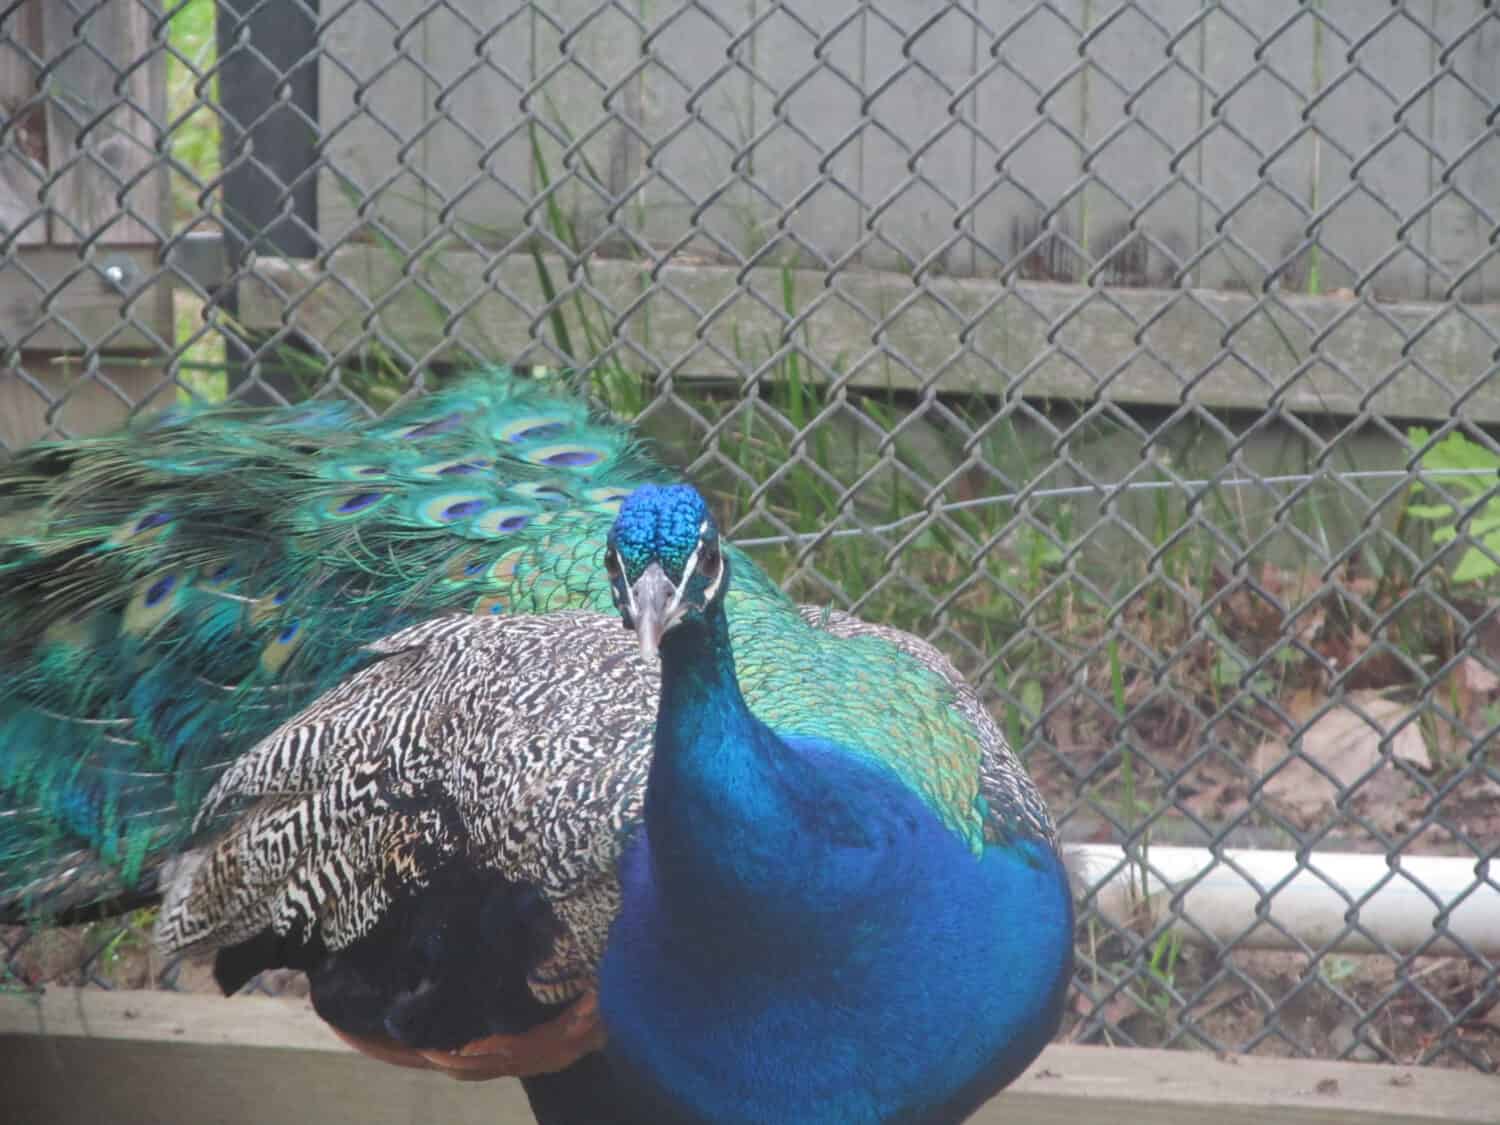 a peacock from York's wild kingdom